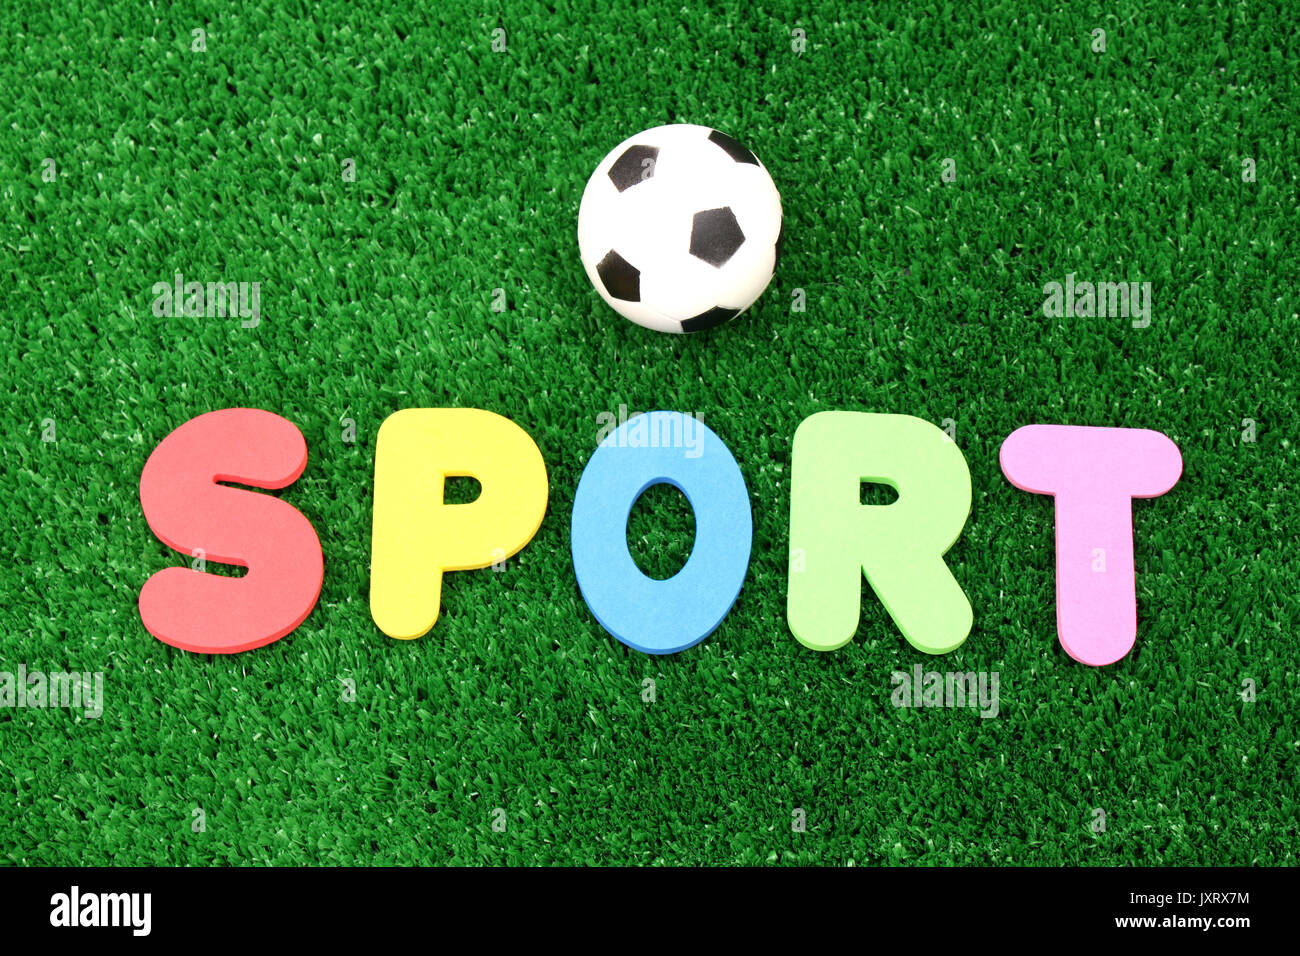 Soport ball on atificial turf - word plastic colours Stock Photo